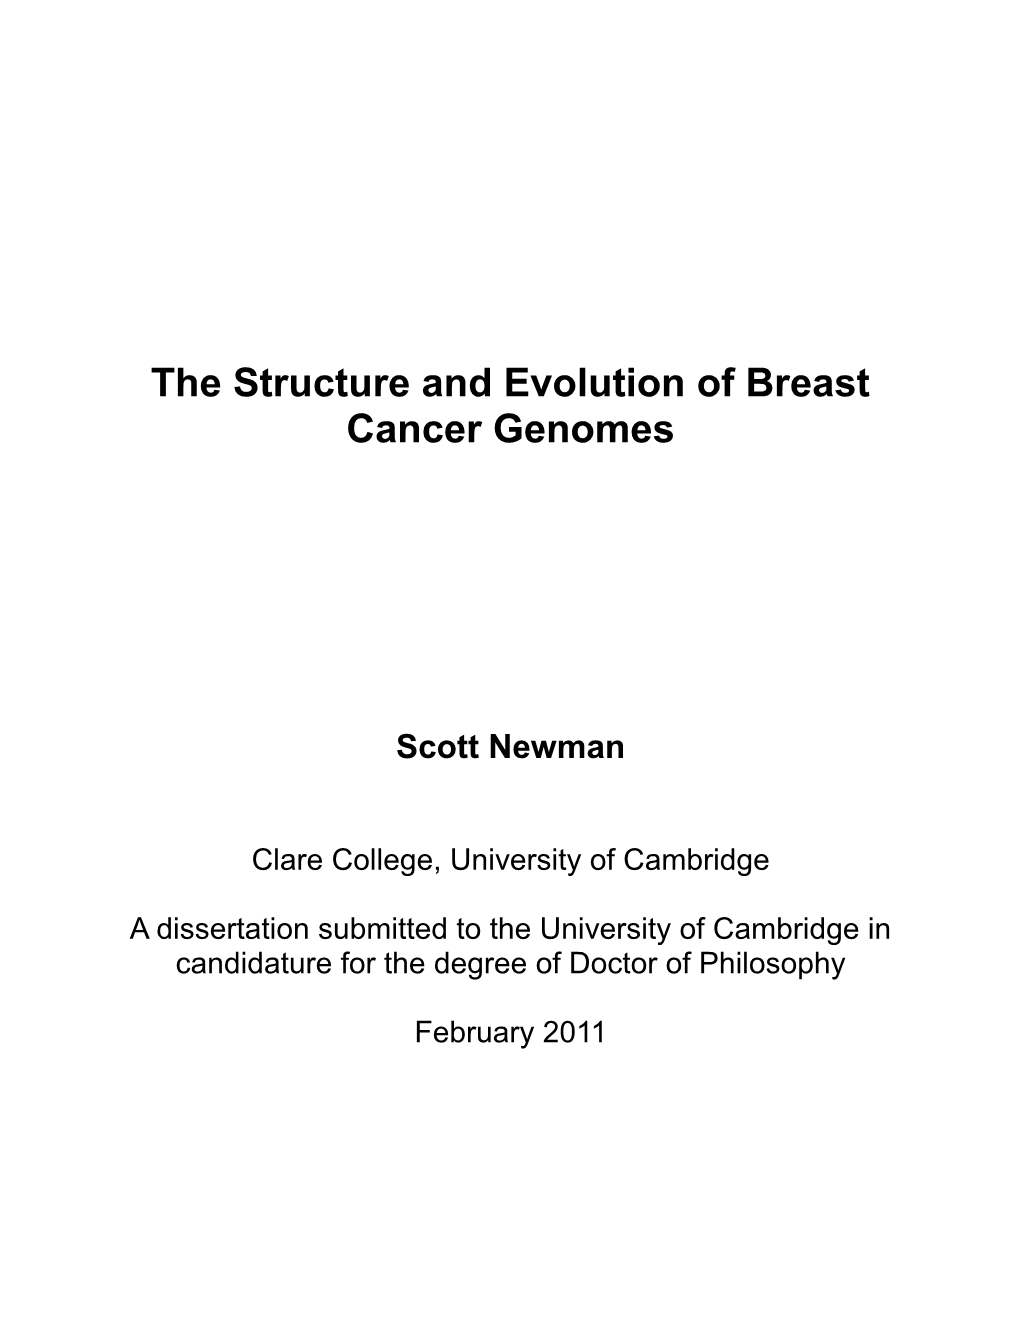 The Structure and Evolution of Breast Cancer Genomes